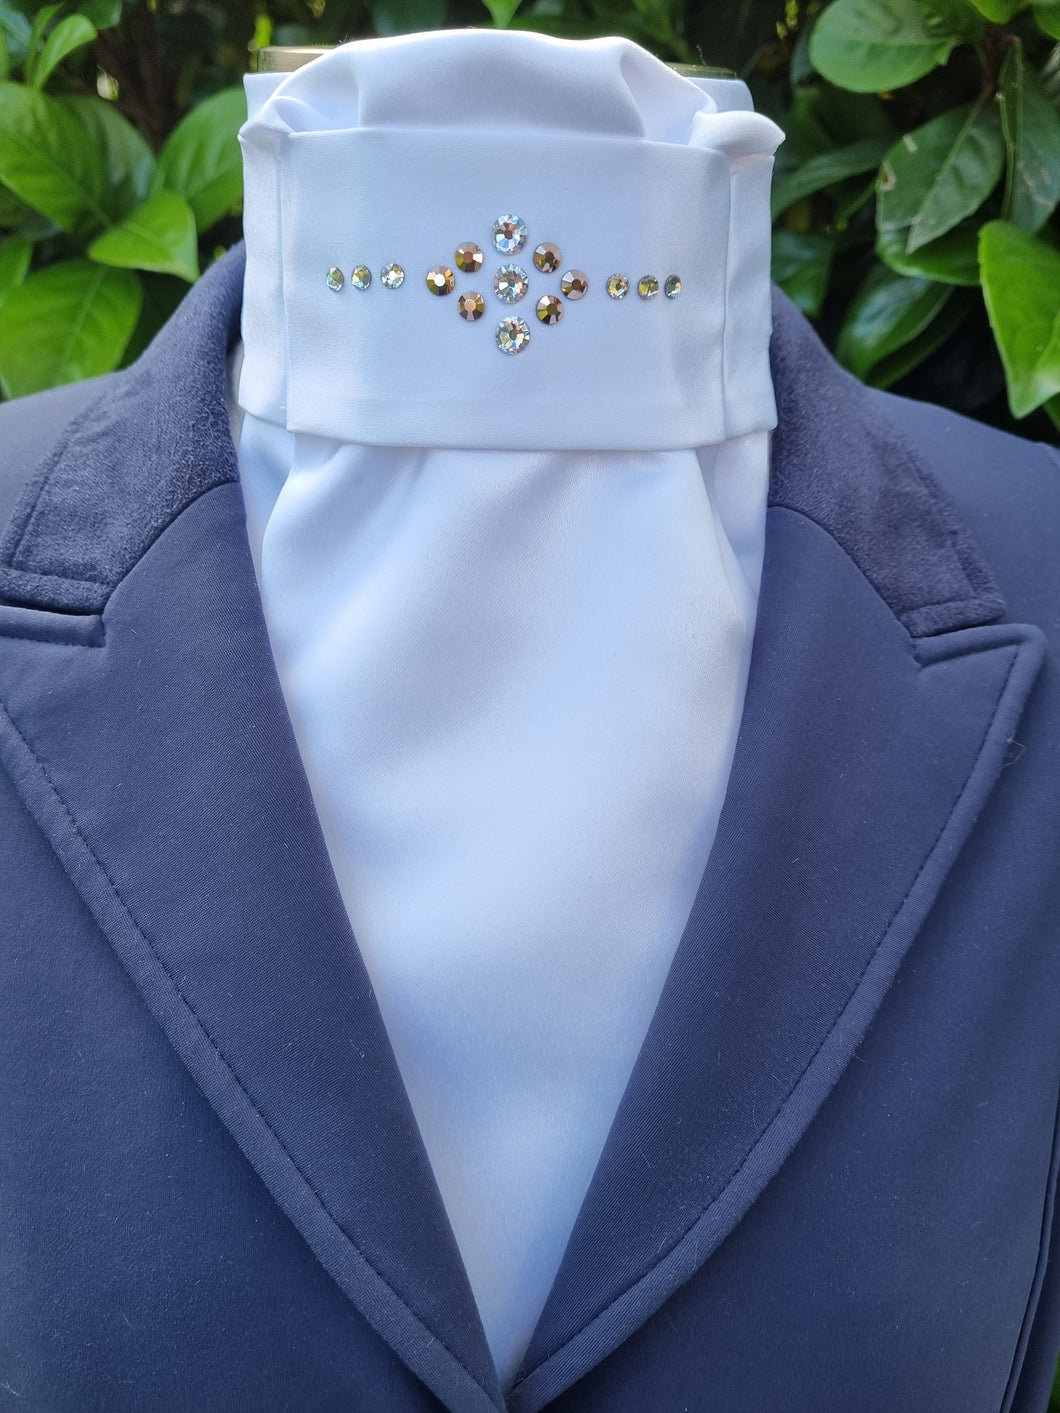 ERA EURO LYNDAL STOCK TIE- White satin or cotton with rose gold and clear crystals